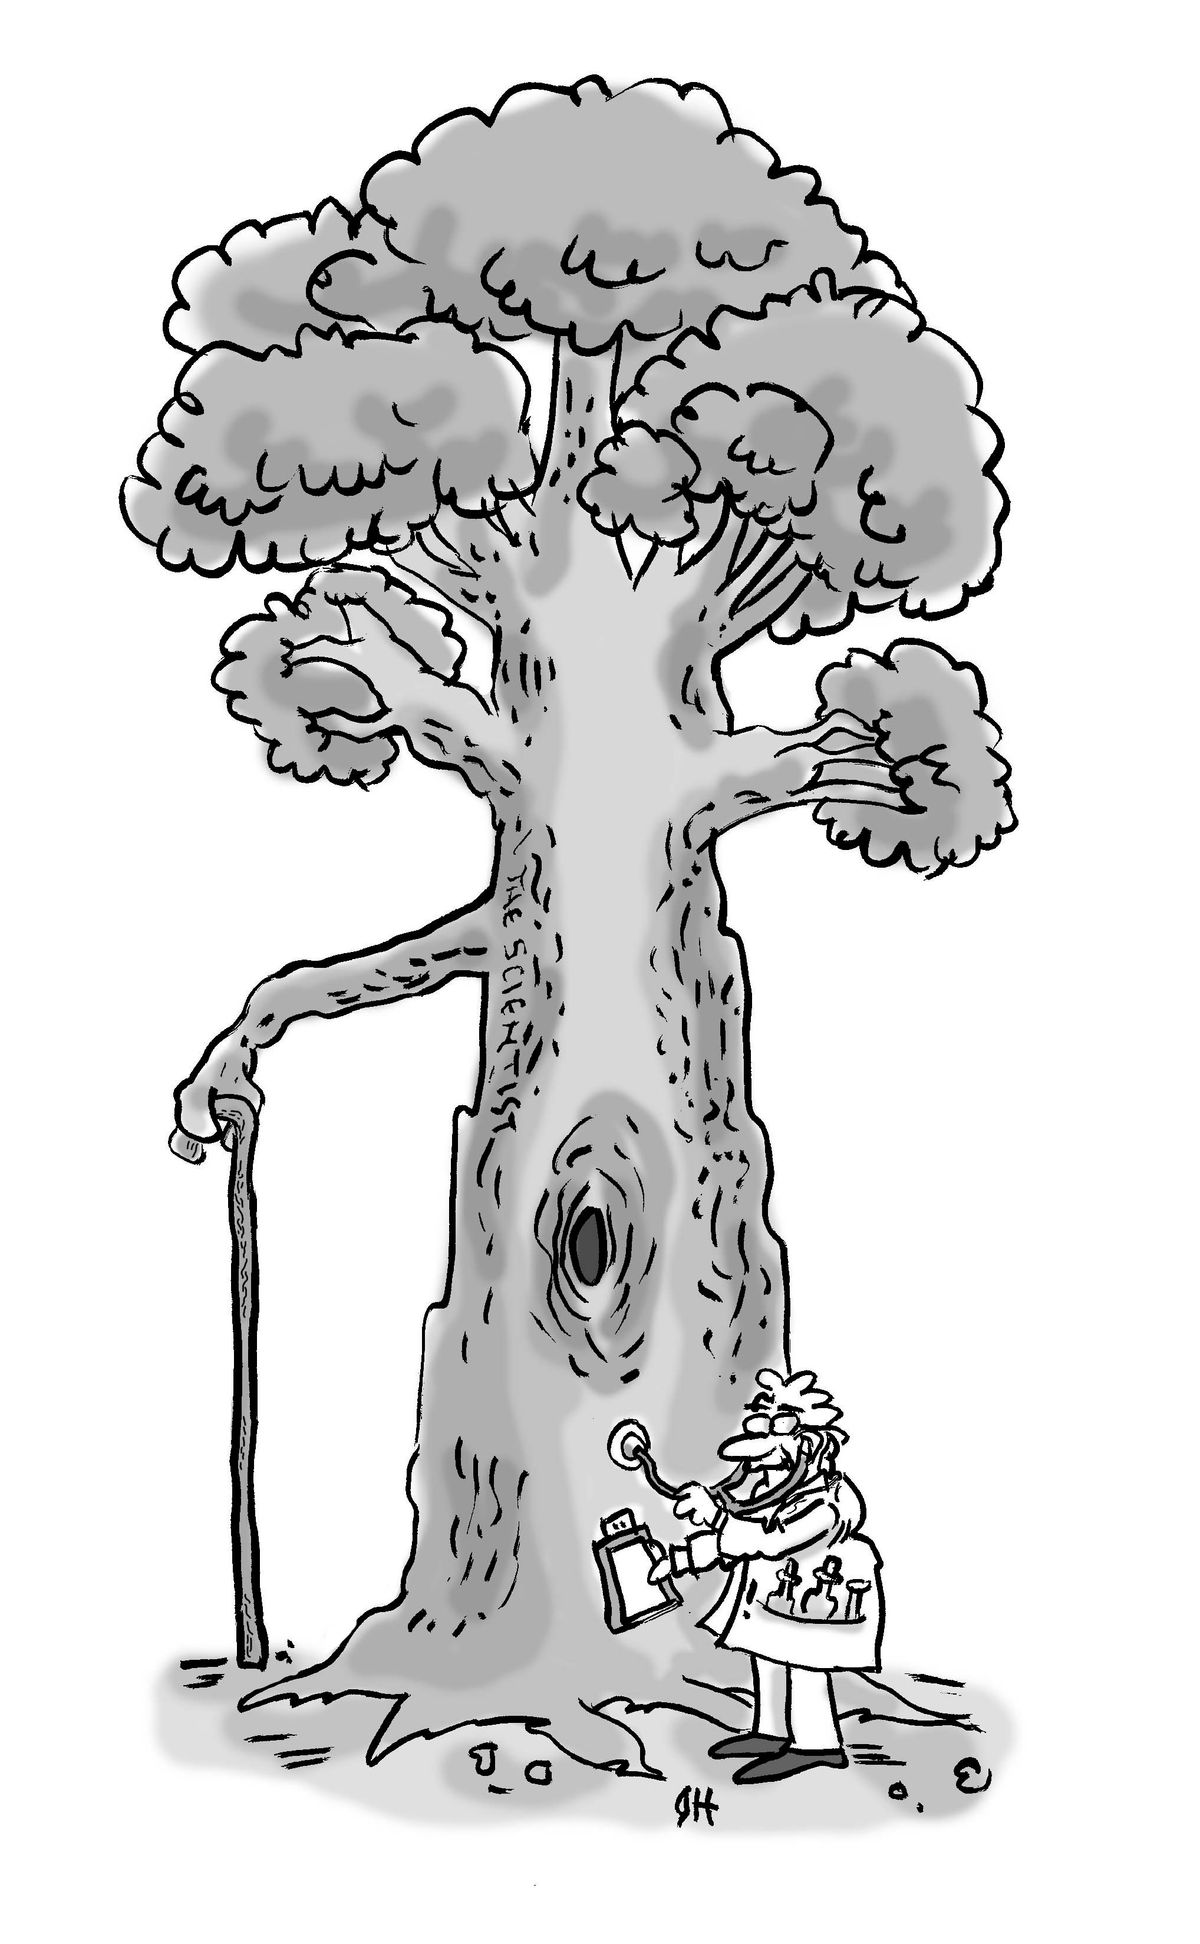 Cartoon of a doctor performing a check-up on an old tree holding a wooden cane.